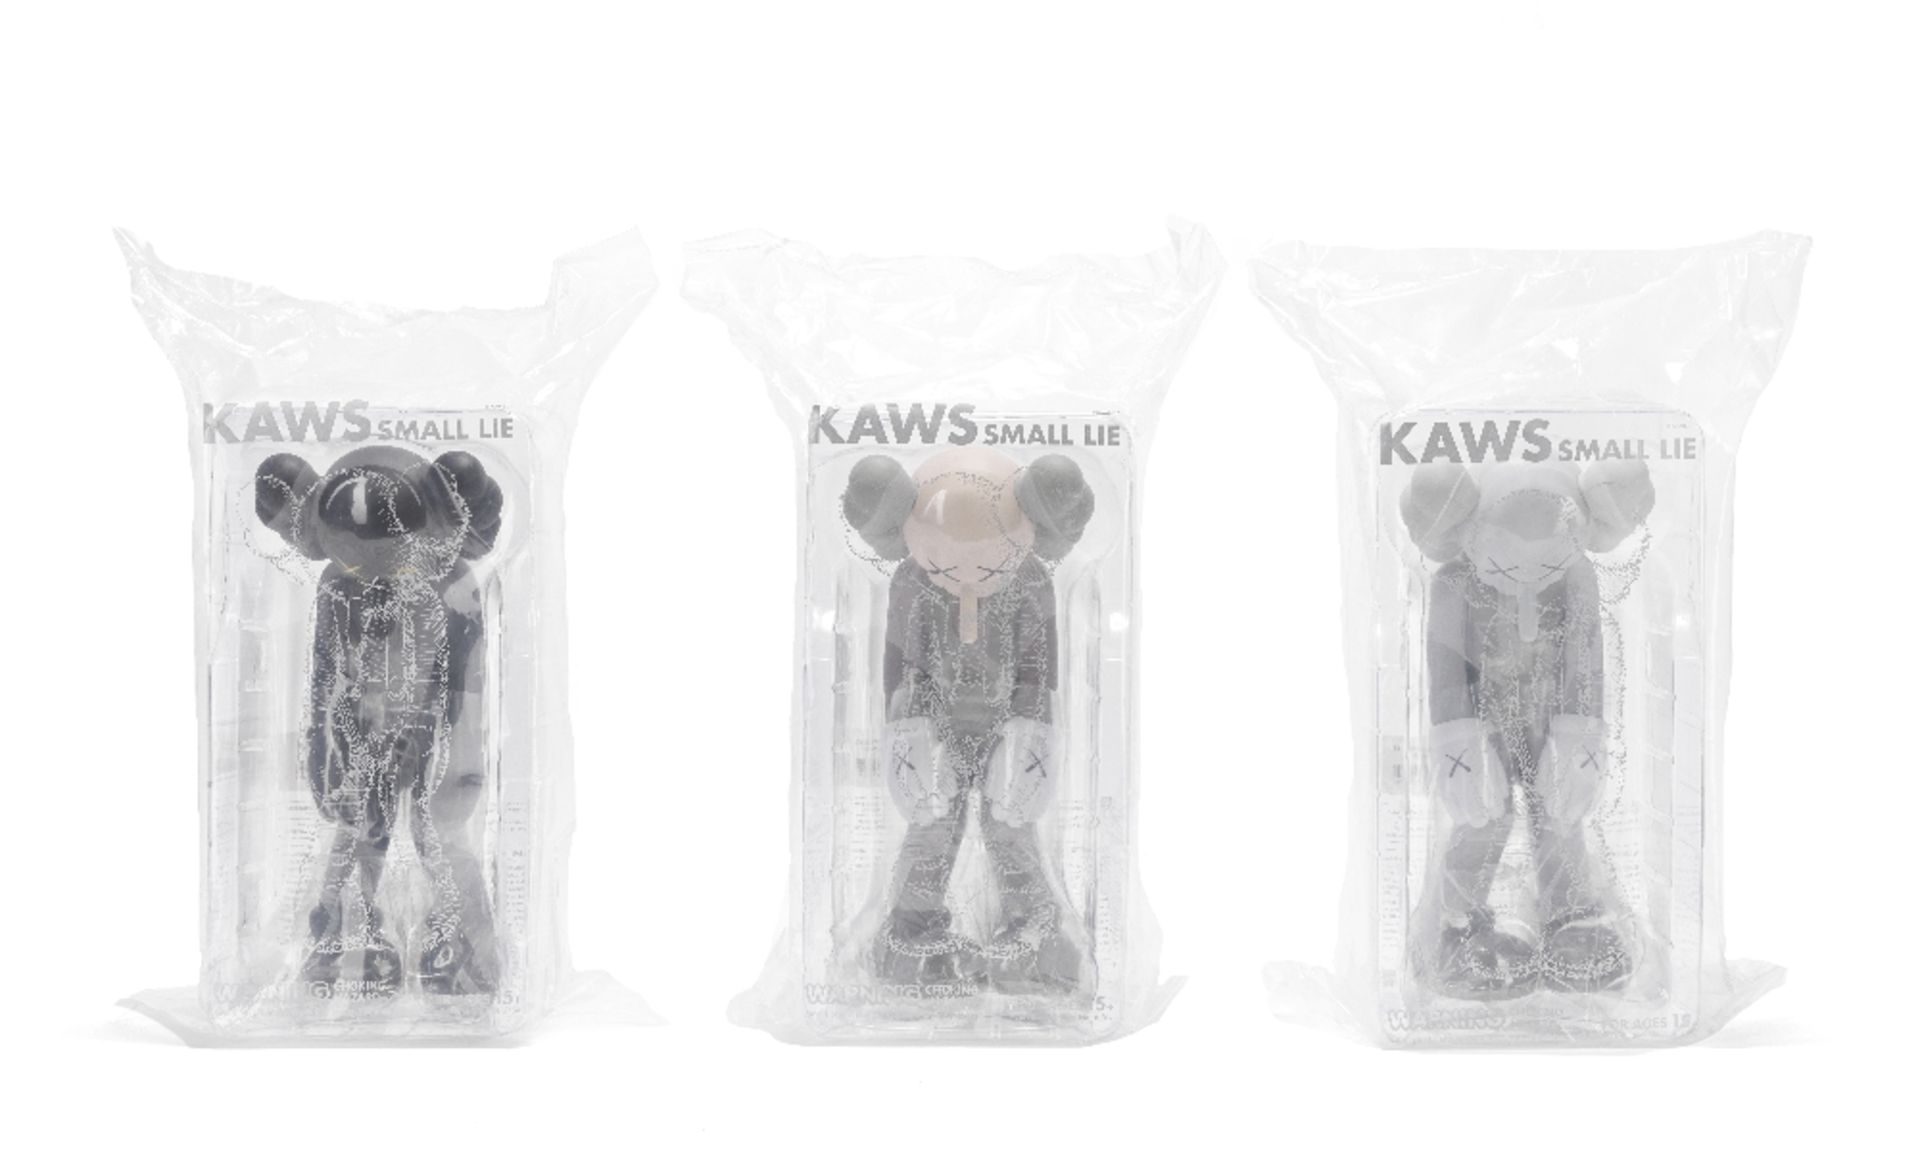 KAWS (American, born 1974) Small Lie The complete set of three painted cast vinyl multiples, 2017...